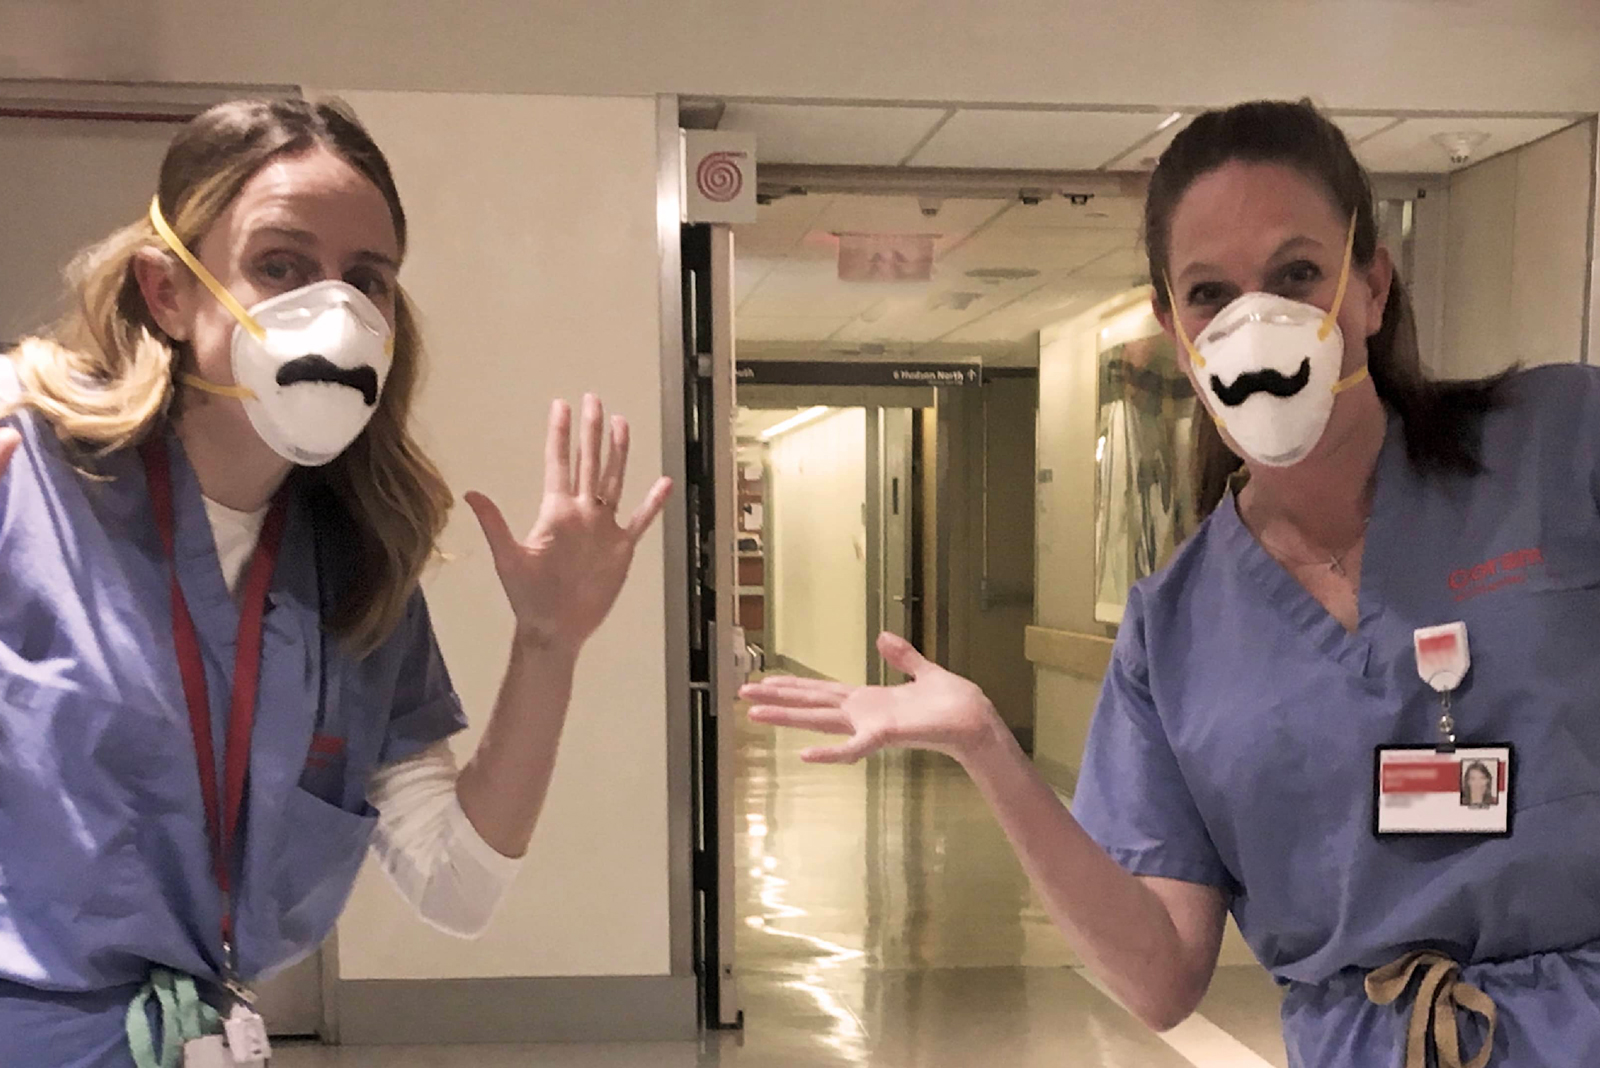 Two nurses show off "Whimsical Care Kits" that feature silly mustaches to add to a face mask.